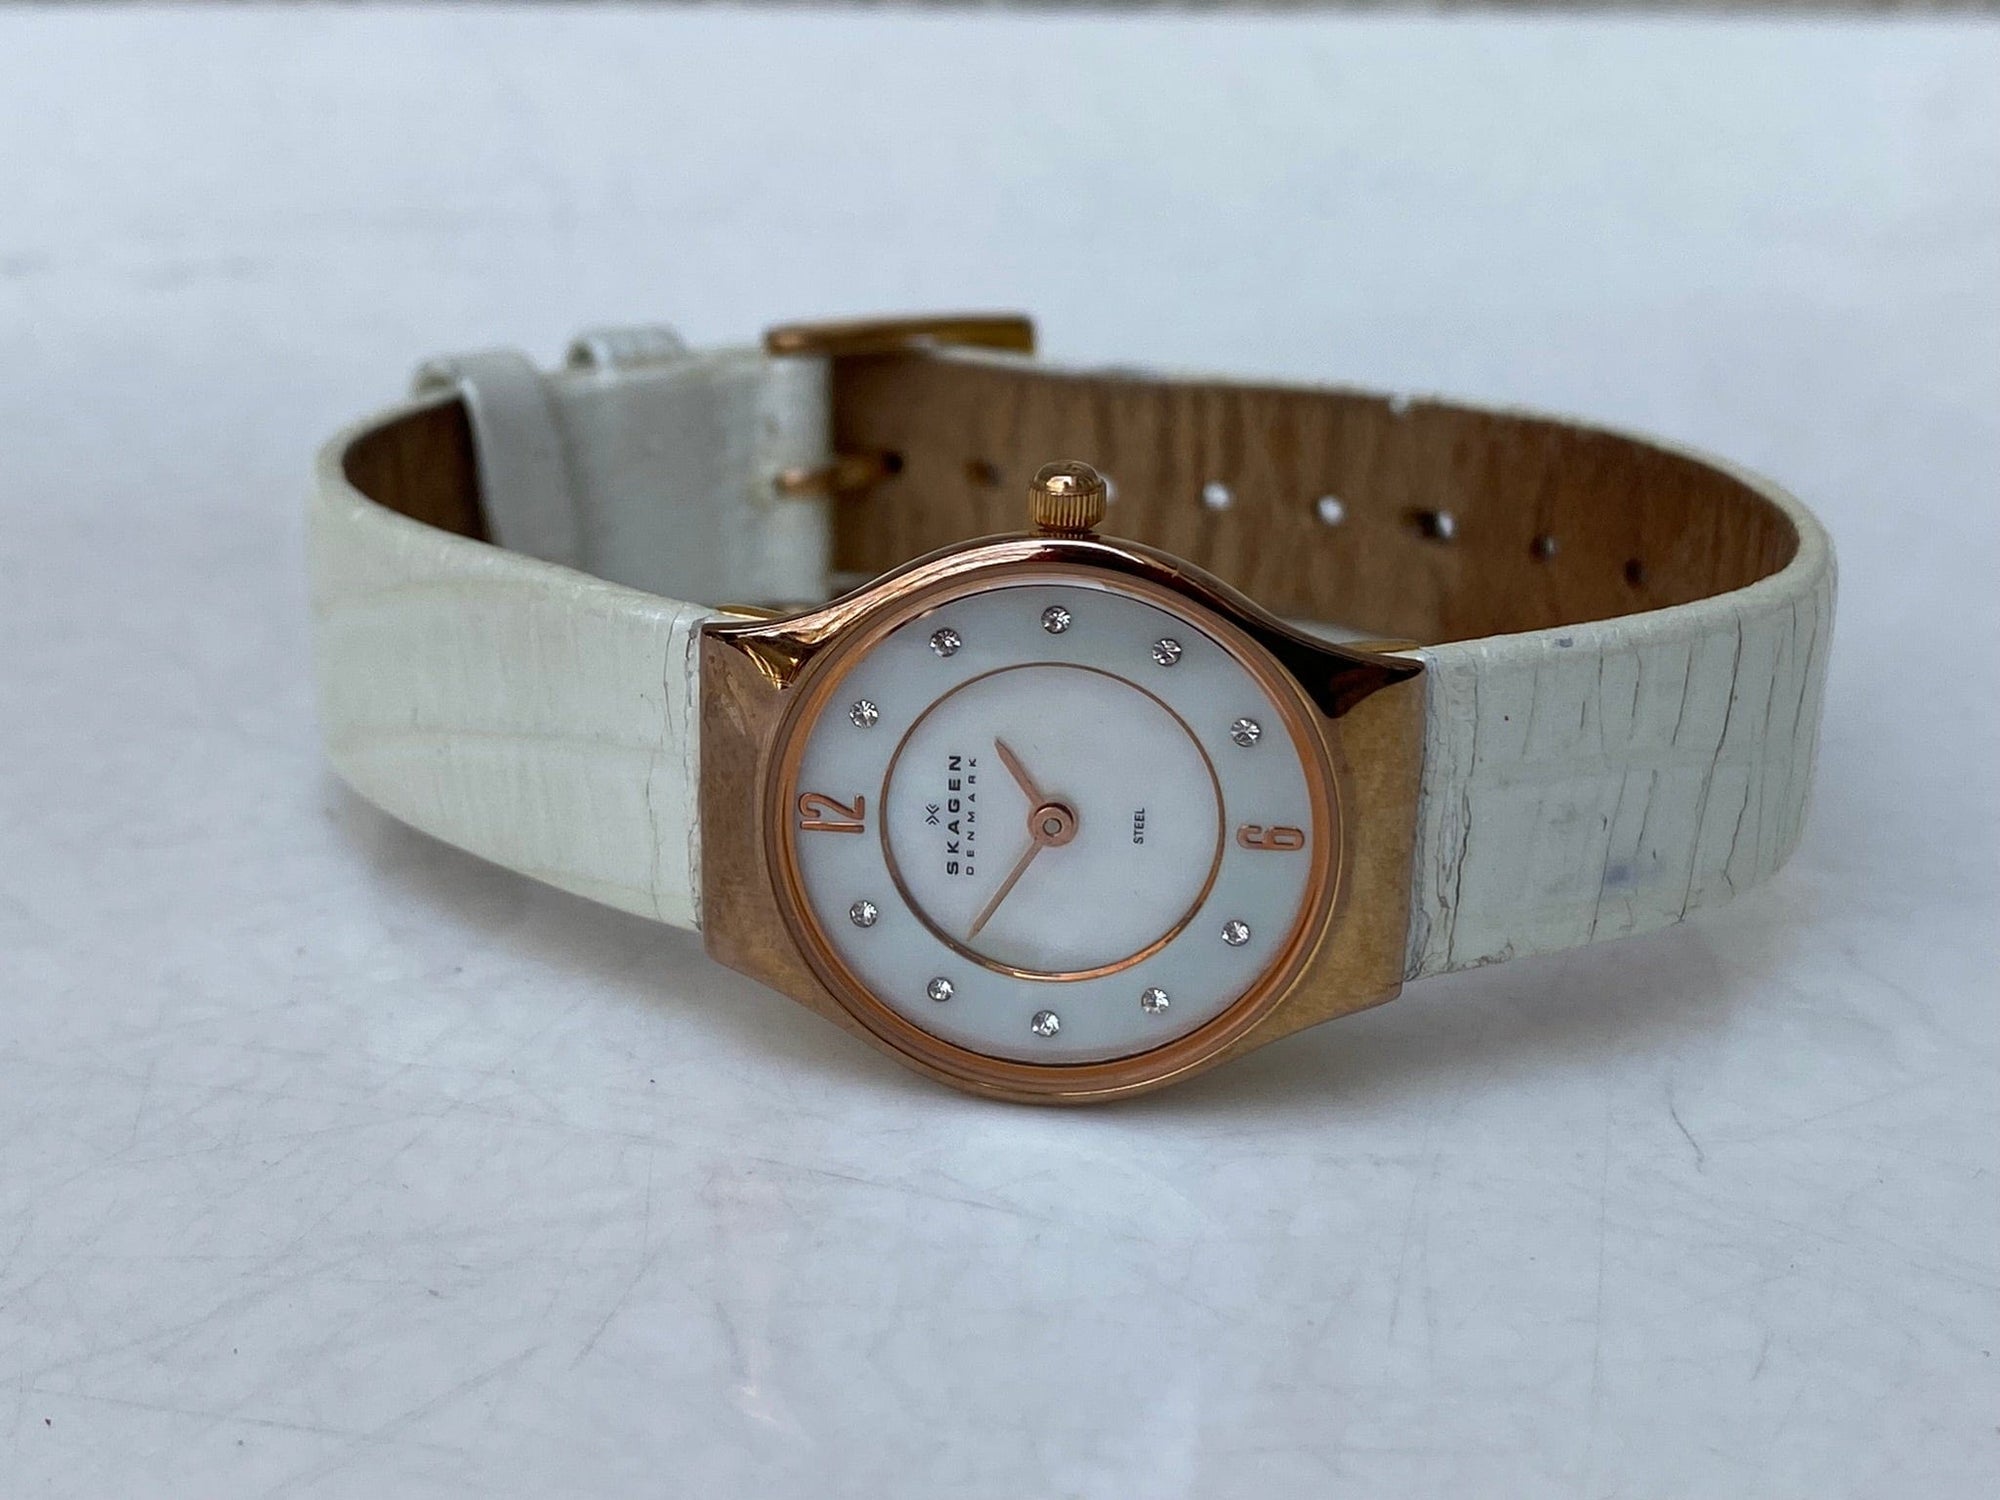 I Like Mikes Mid Century Modern Watches Skagen Women's Rose Gold Tone Round Watch Mother of Pearl Dial White Leather Band